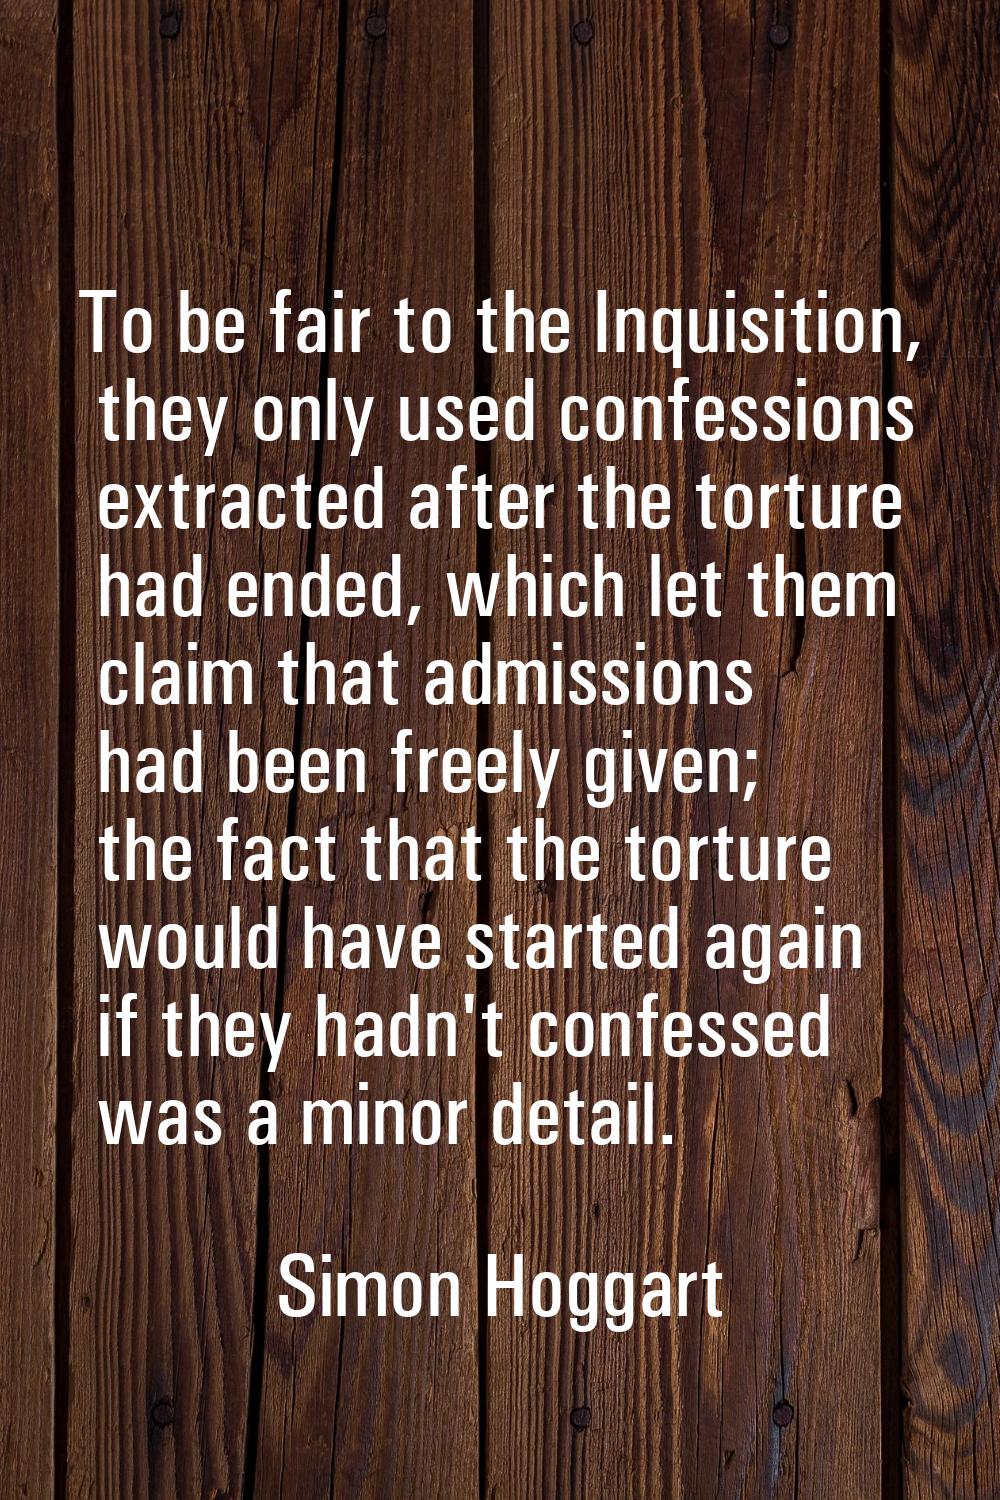 To be fair to the Inquisition, they only used confessions extracted after the torture had ended, wh